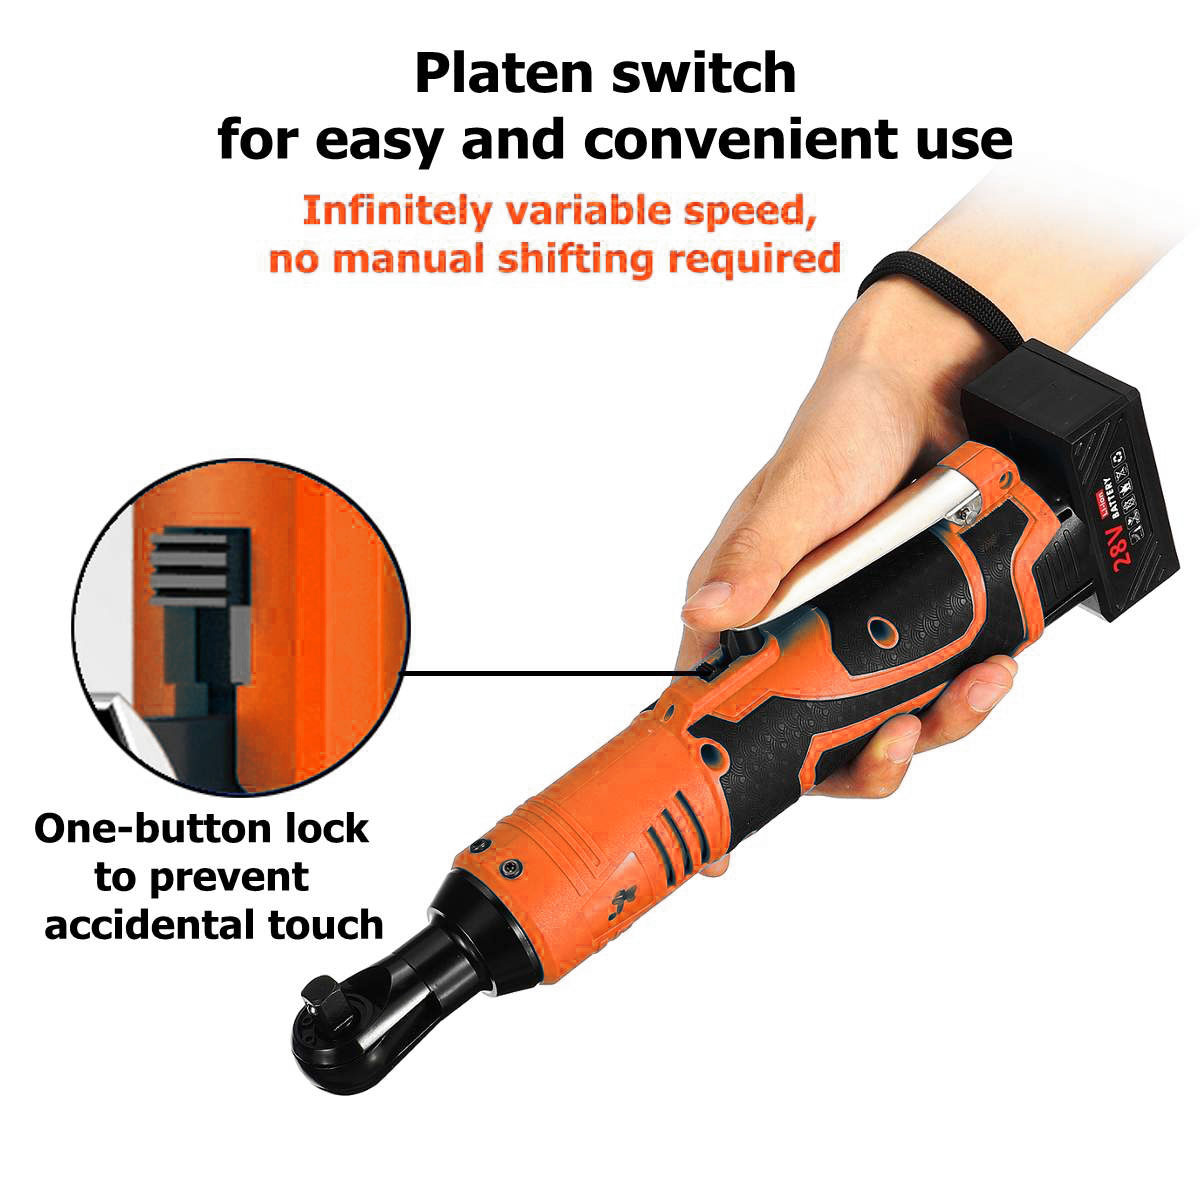 Cordless-38Inch-Electric-Ratchet-Wrench-Set-Right-Angle-Wrench-Power-Ratchet-Tool-w-1Pcs-Lithium-Ion-1553005-4